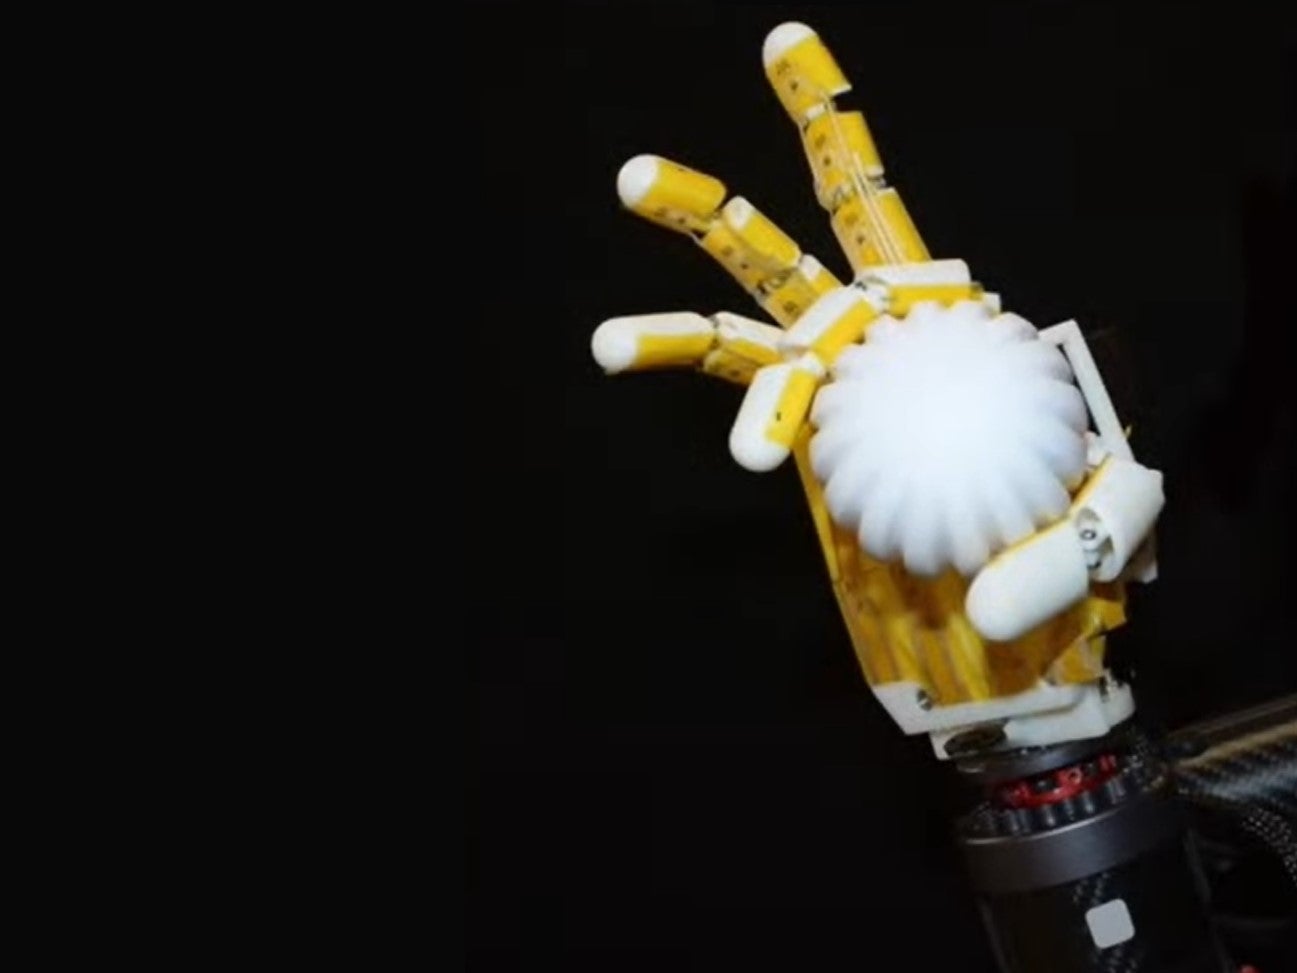 Artificial skin developed by scientists at Caltech aims to give humans more precise control over robots